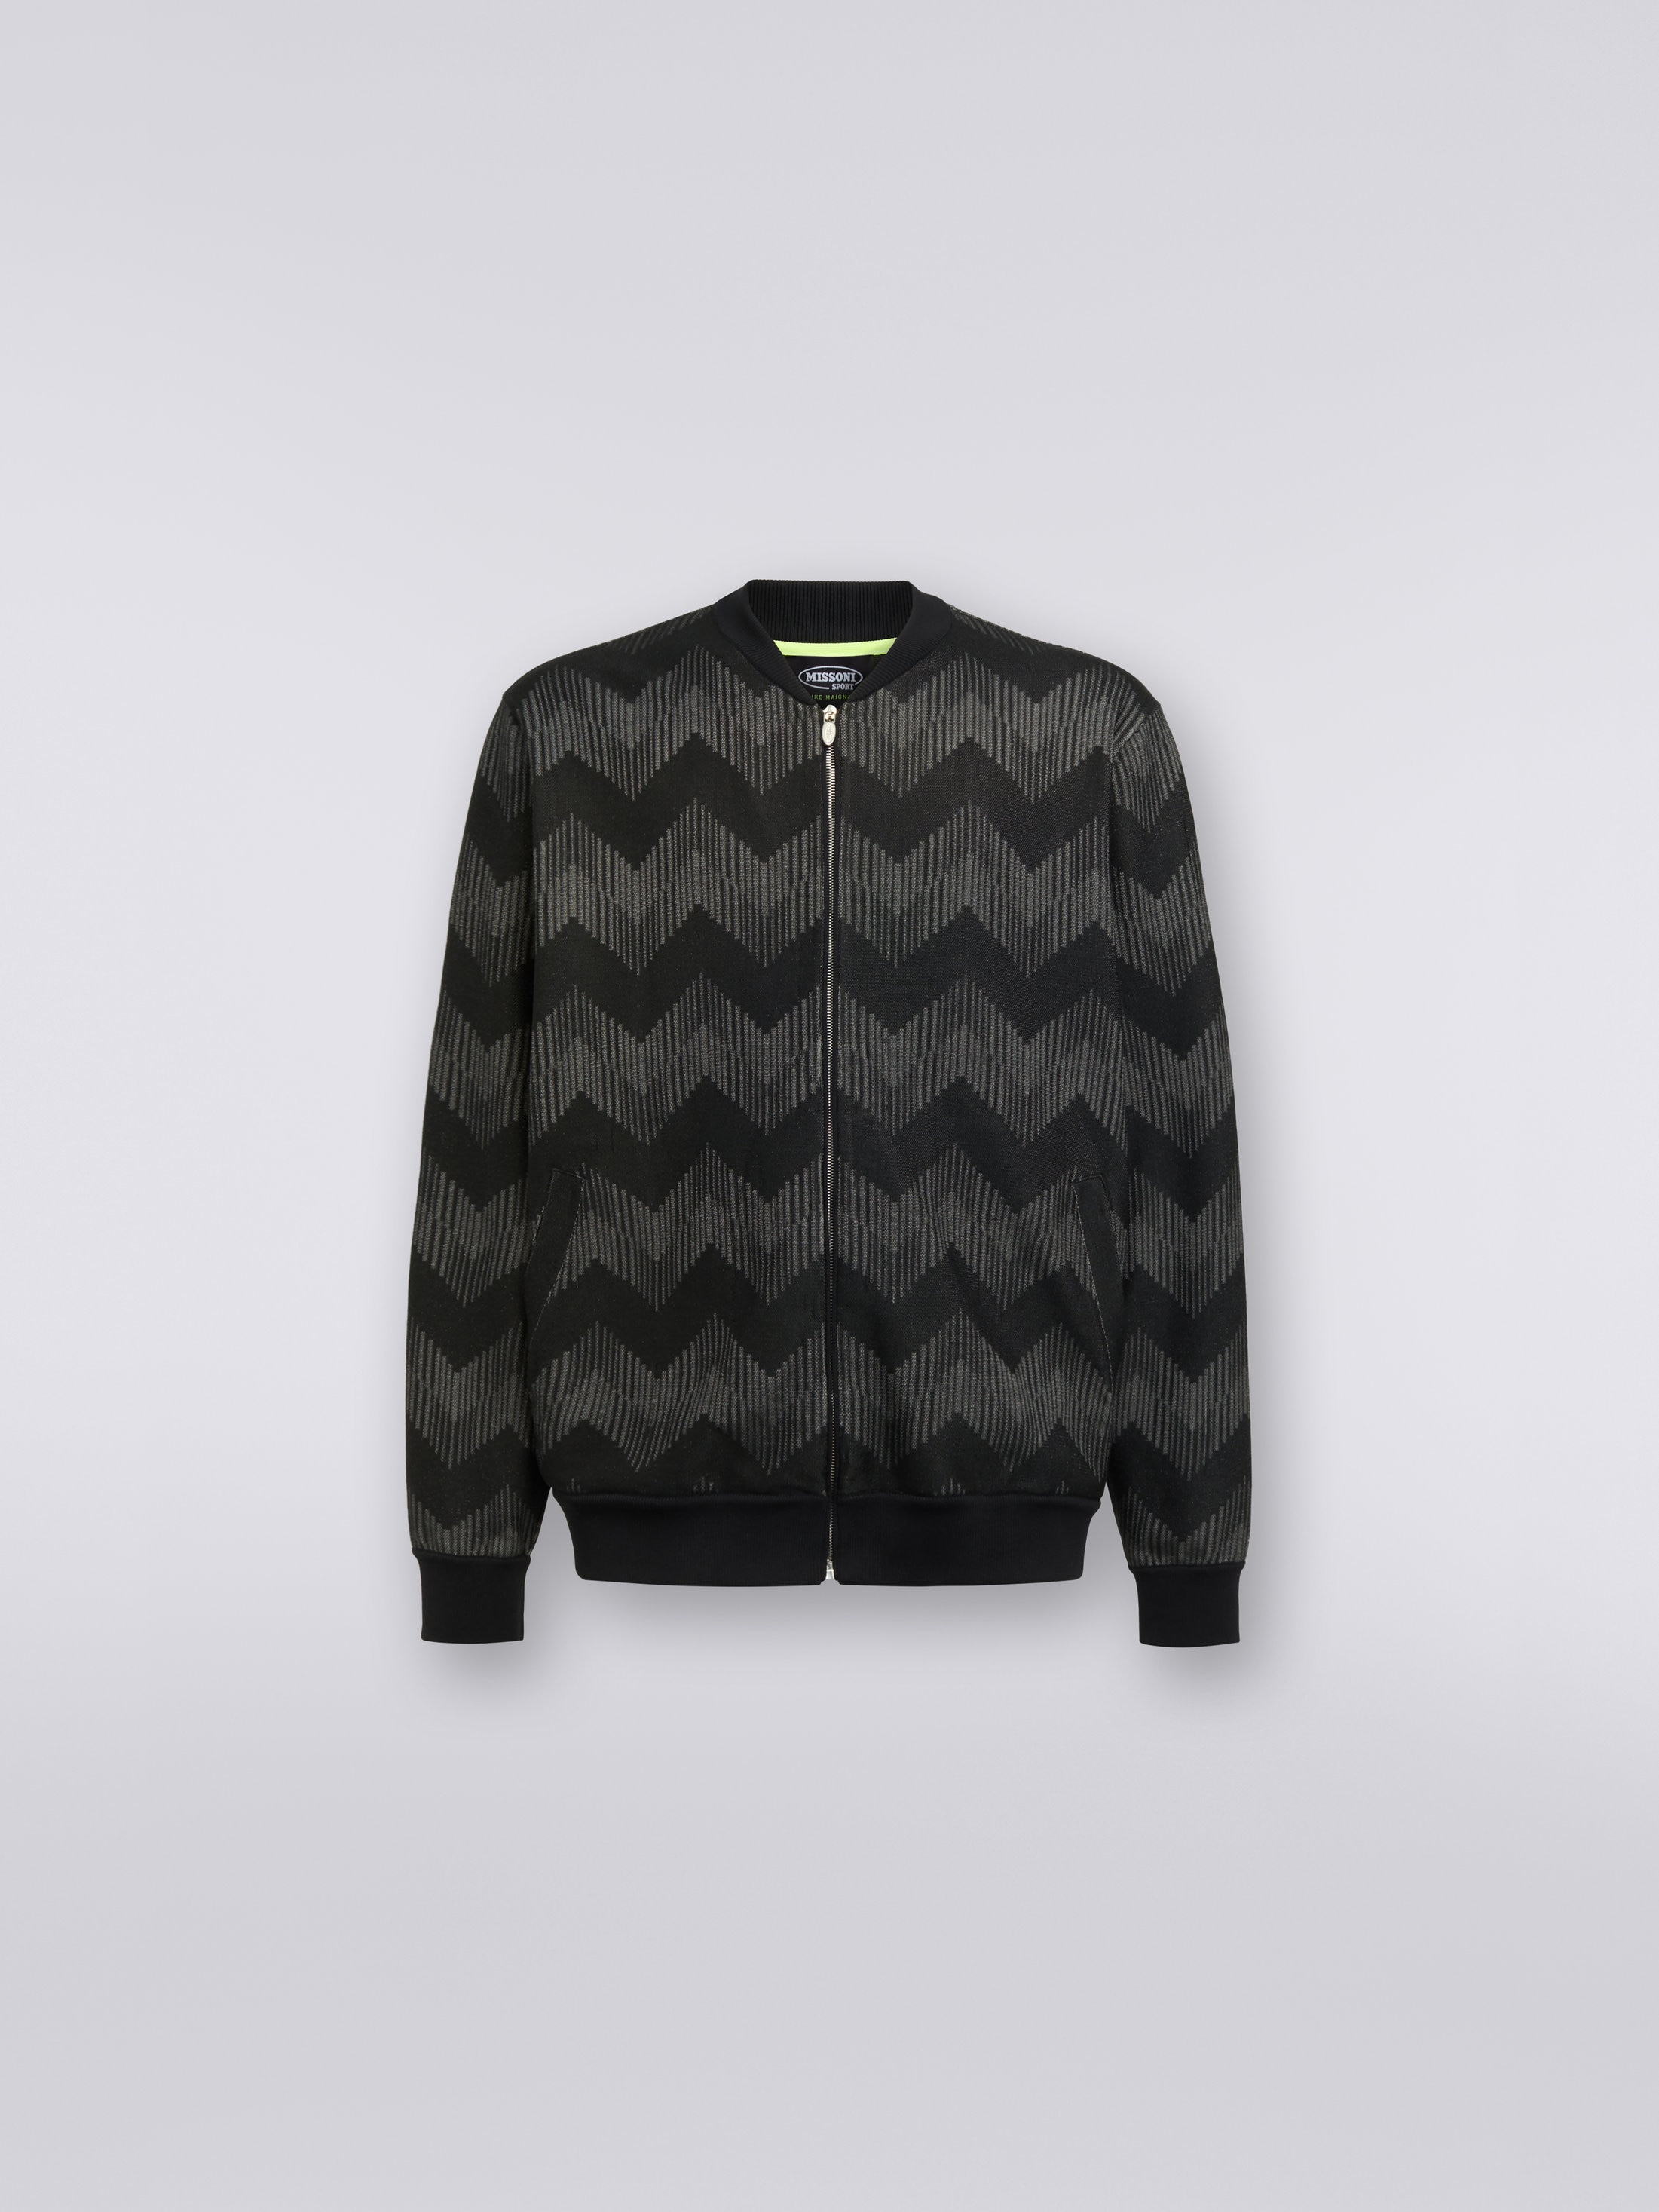 Cotton blend zigzag bomber jacket in collaboration with Mike 